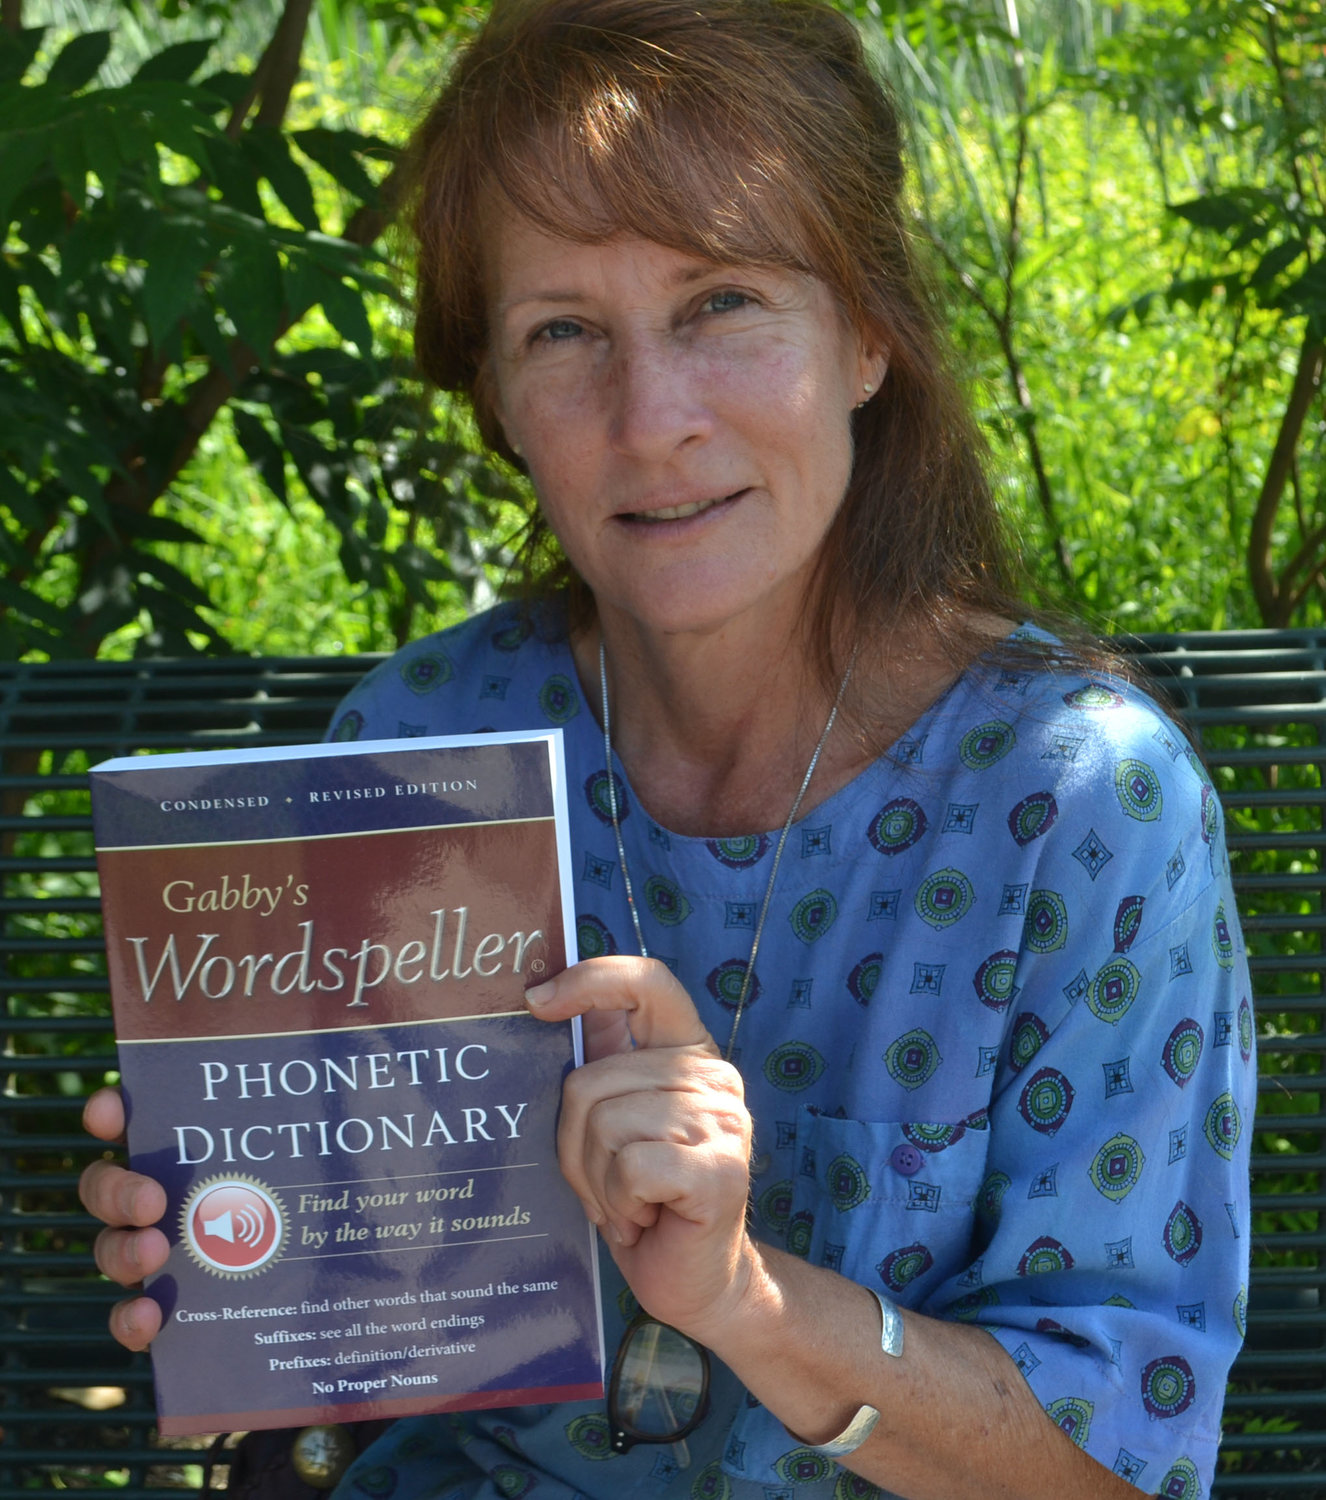 Diane Frank holds up "Gabby's Wordspeller," the phonetic dictionary she created for her daughter, who is dyslexic.